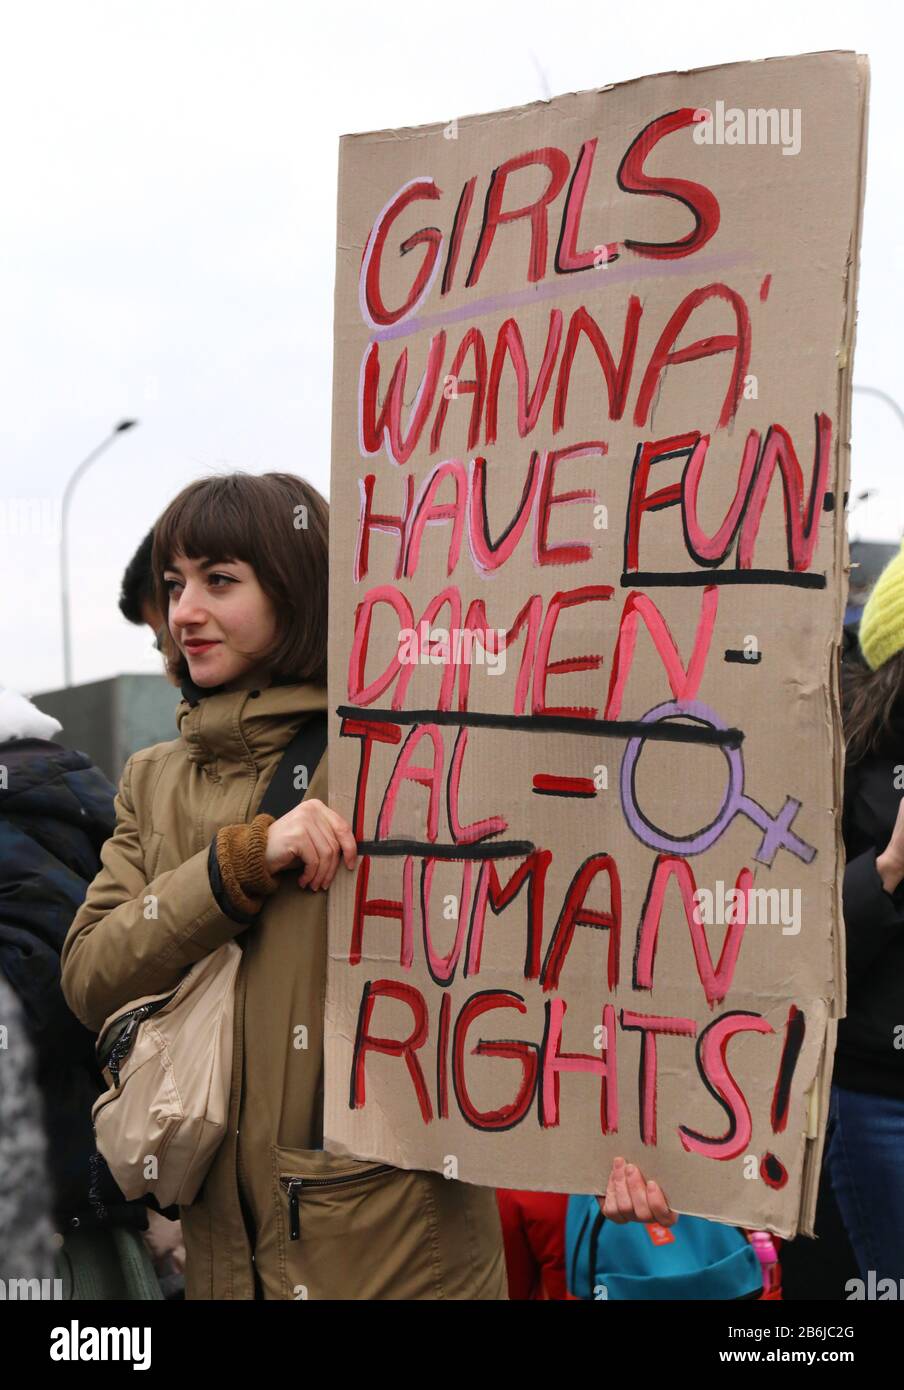 Cracow. Krakow. Poland. Manifa. Women demonstrate for equal rights on International Women's Day. Stock Photo